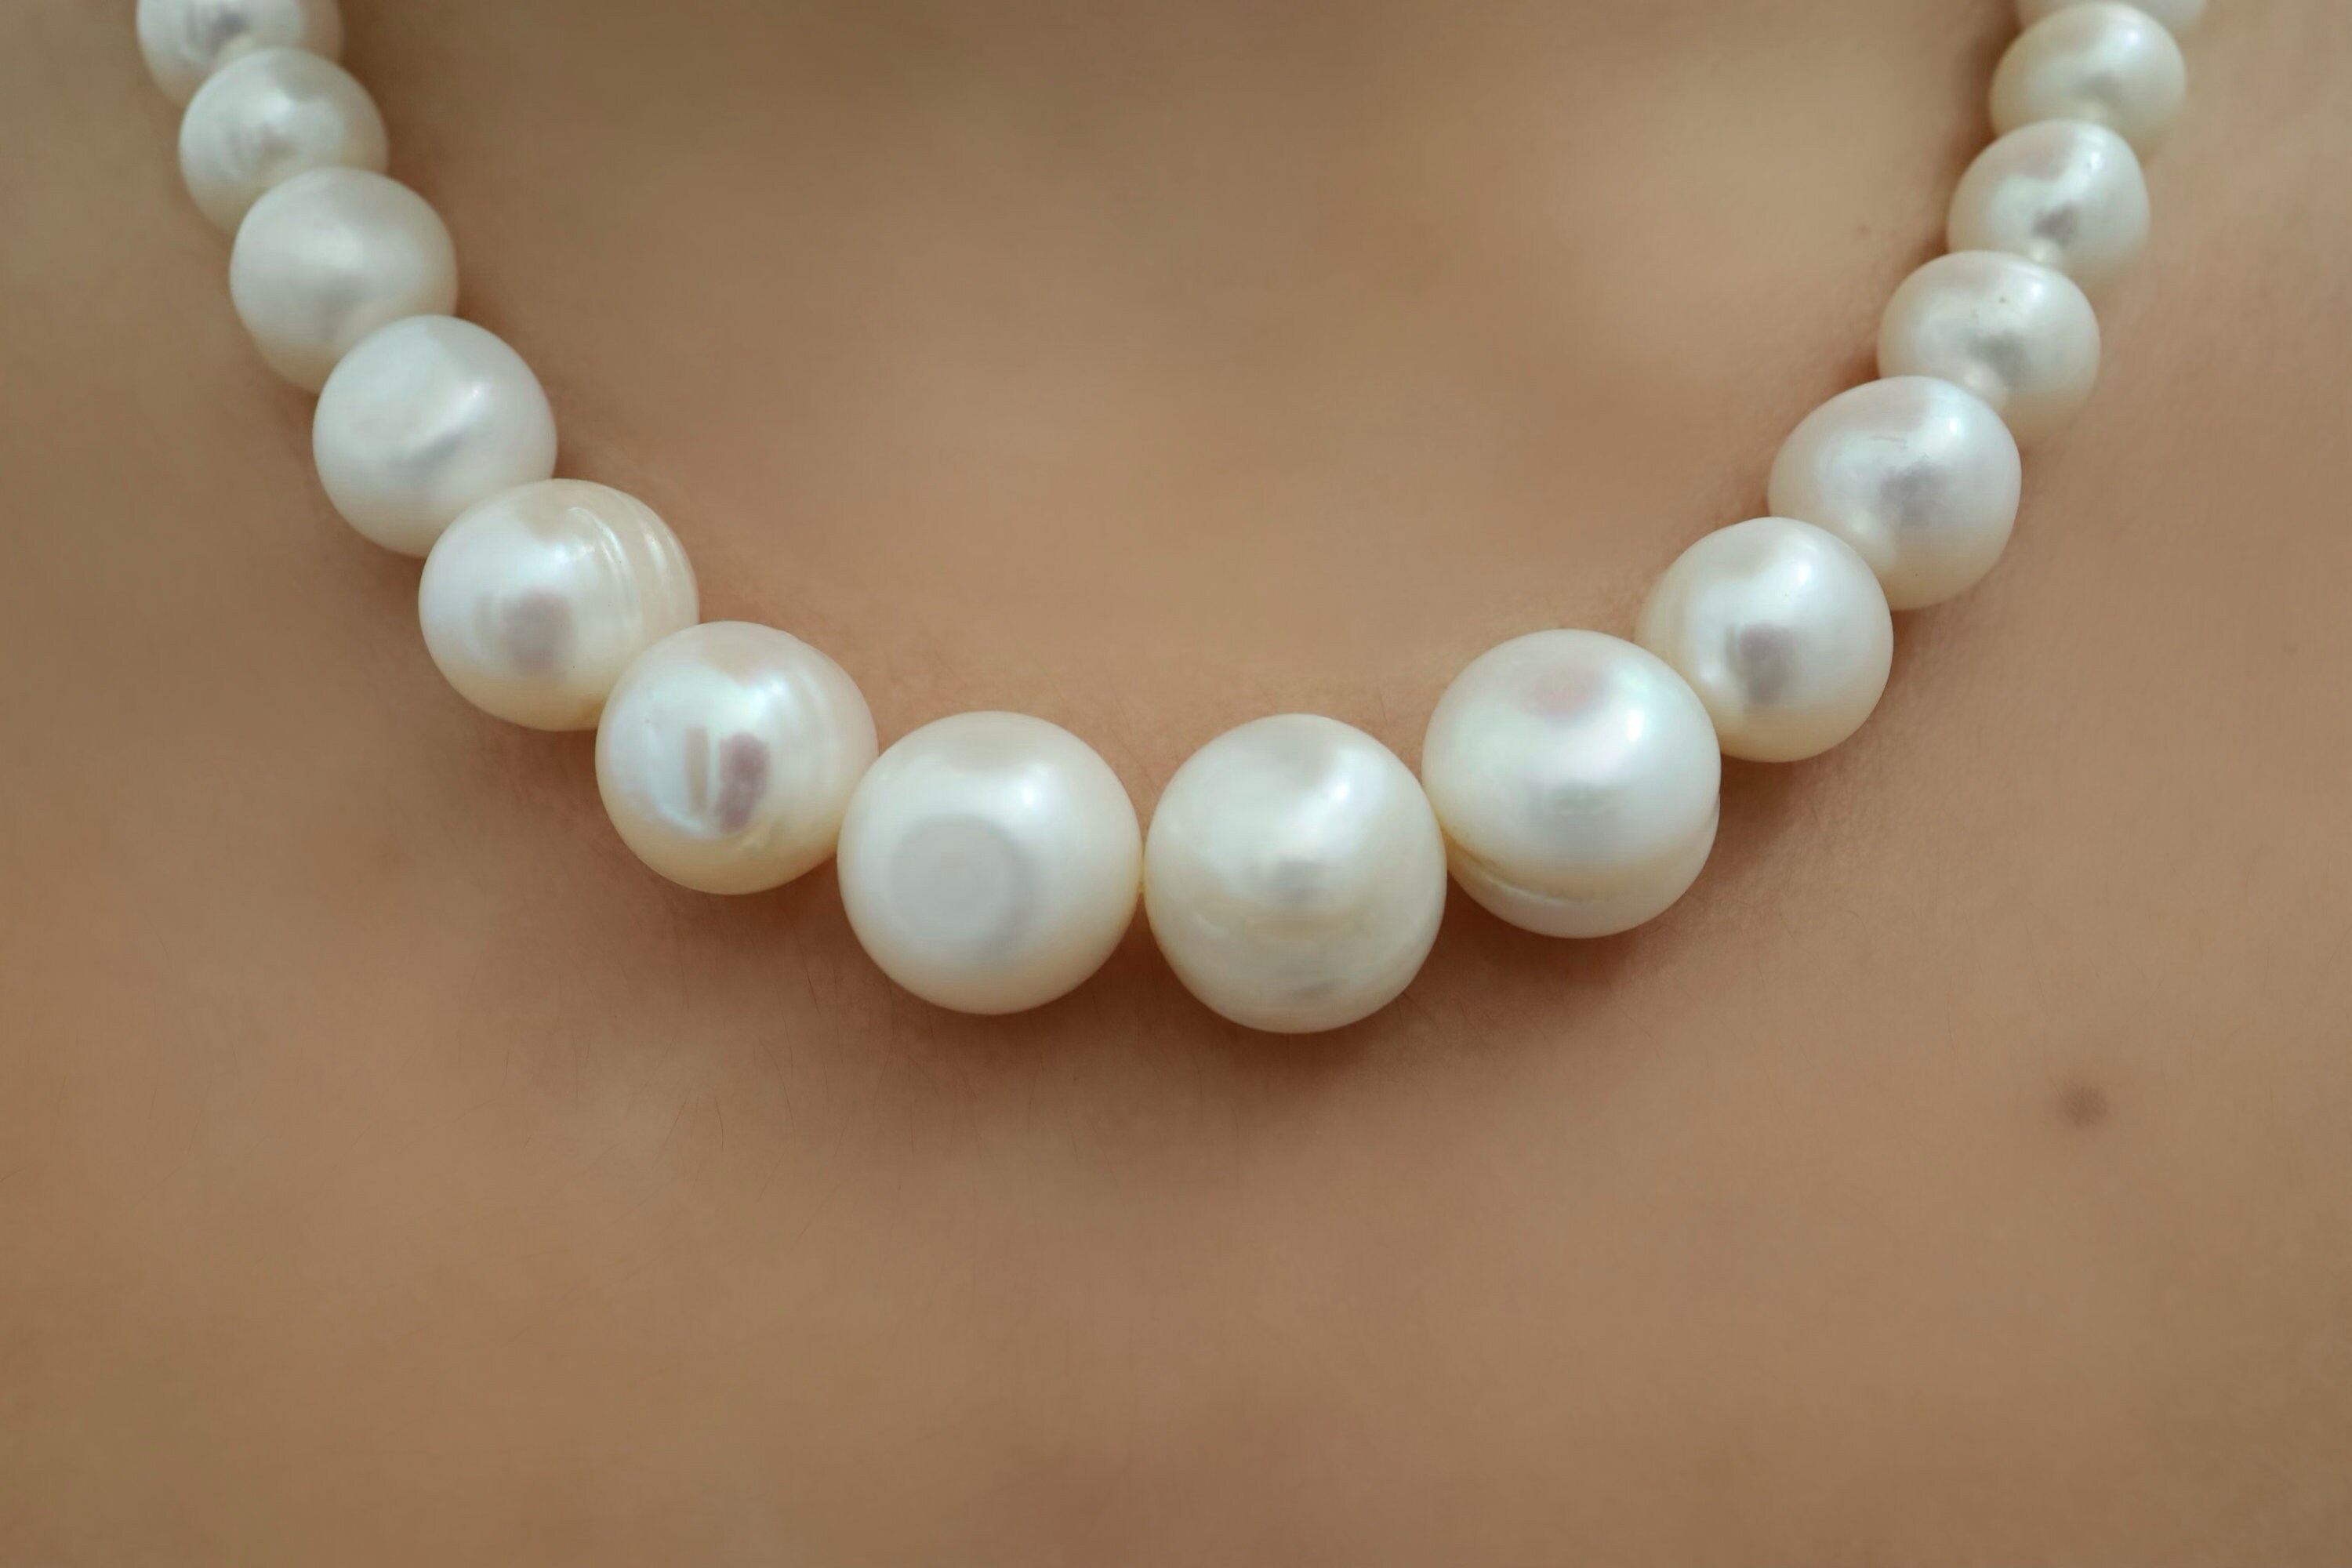 1 Str, Freshwater Pearls, Irregular Pearls, Natural White Pearl Necklace, AAA, DIY Pearl Accessories, Multi-Size Pearls, Length 35cm